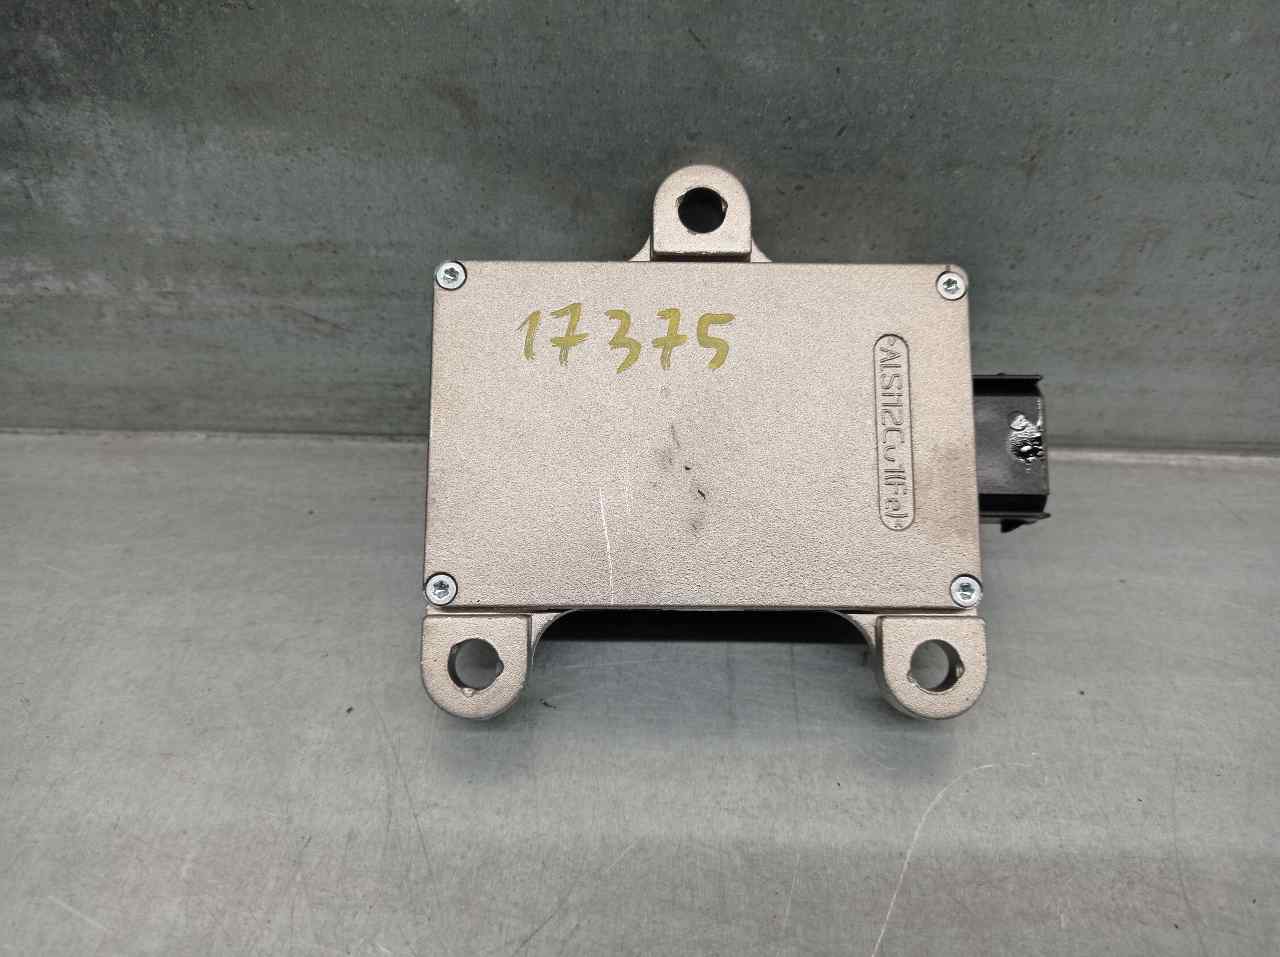 FIAT Croma 194 (2005-2011) Other Control Units 46832824, 14330501, TRW 19884688